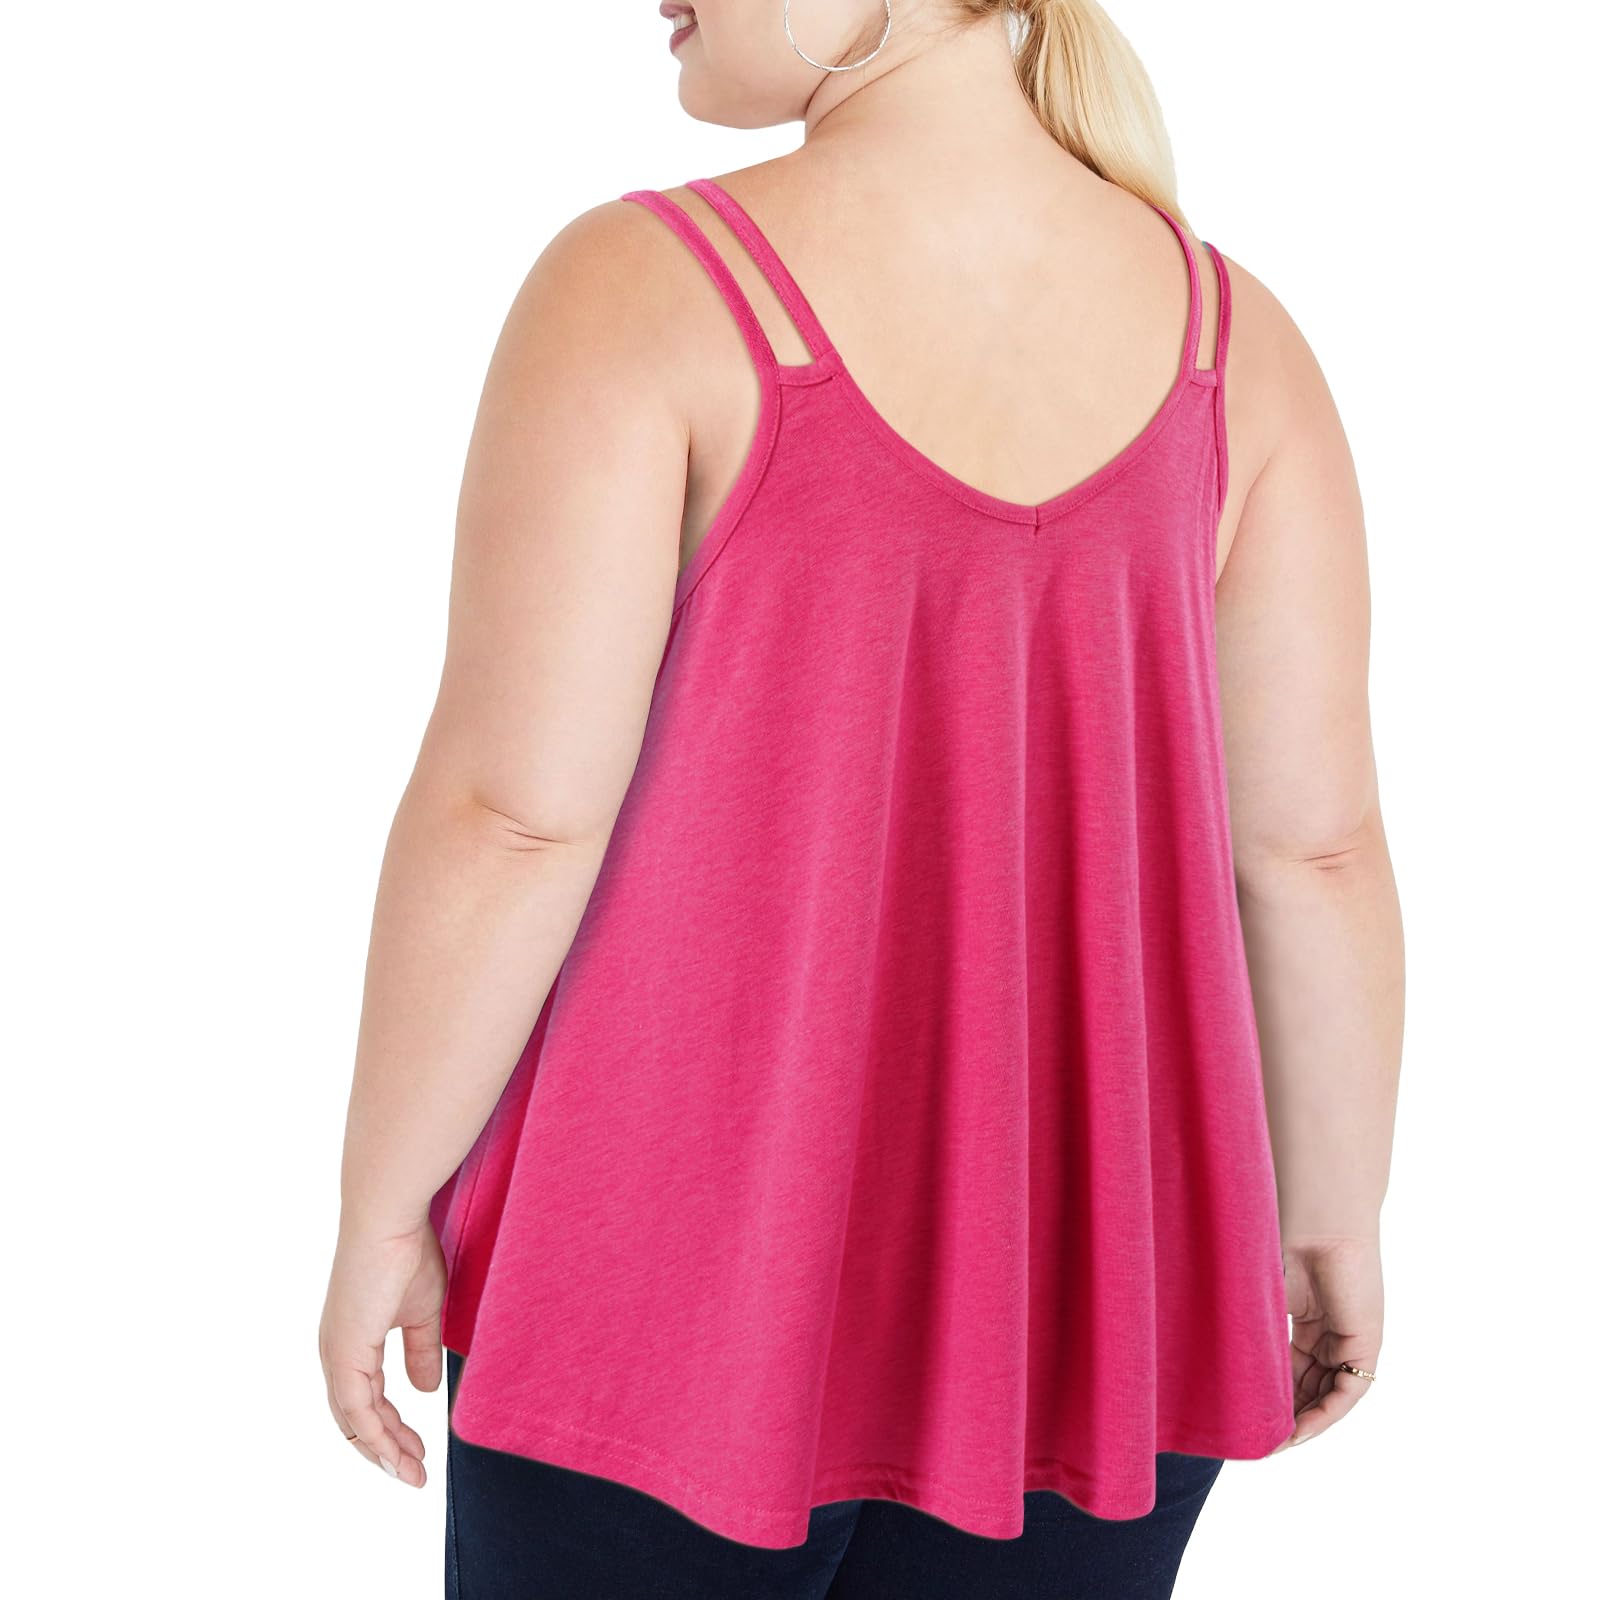 Plus Size Tank Tops for Women V Neck Spaghetti Camisole-Berry Pink - Moon Wood